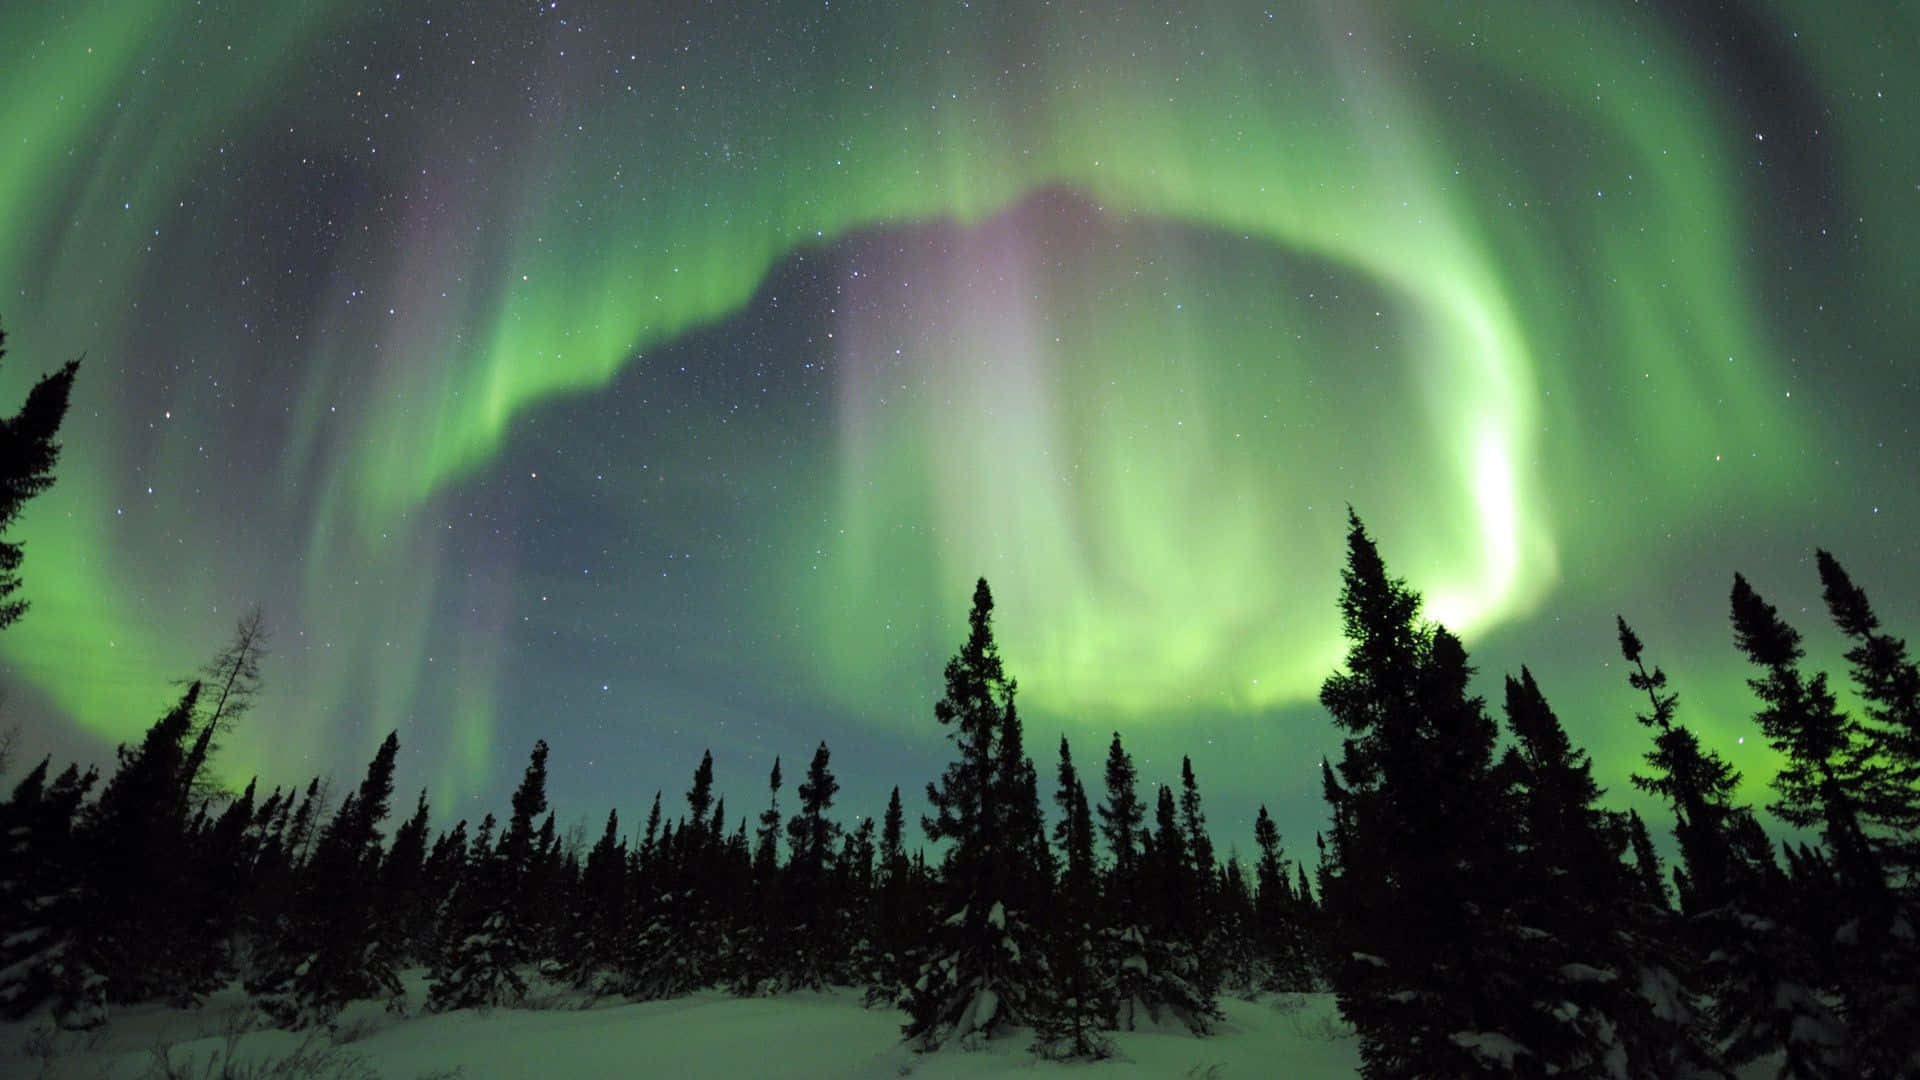 Dancing lights of the beautiful Northern Lights